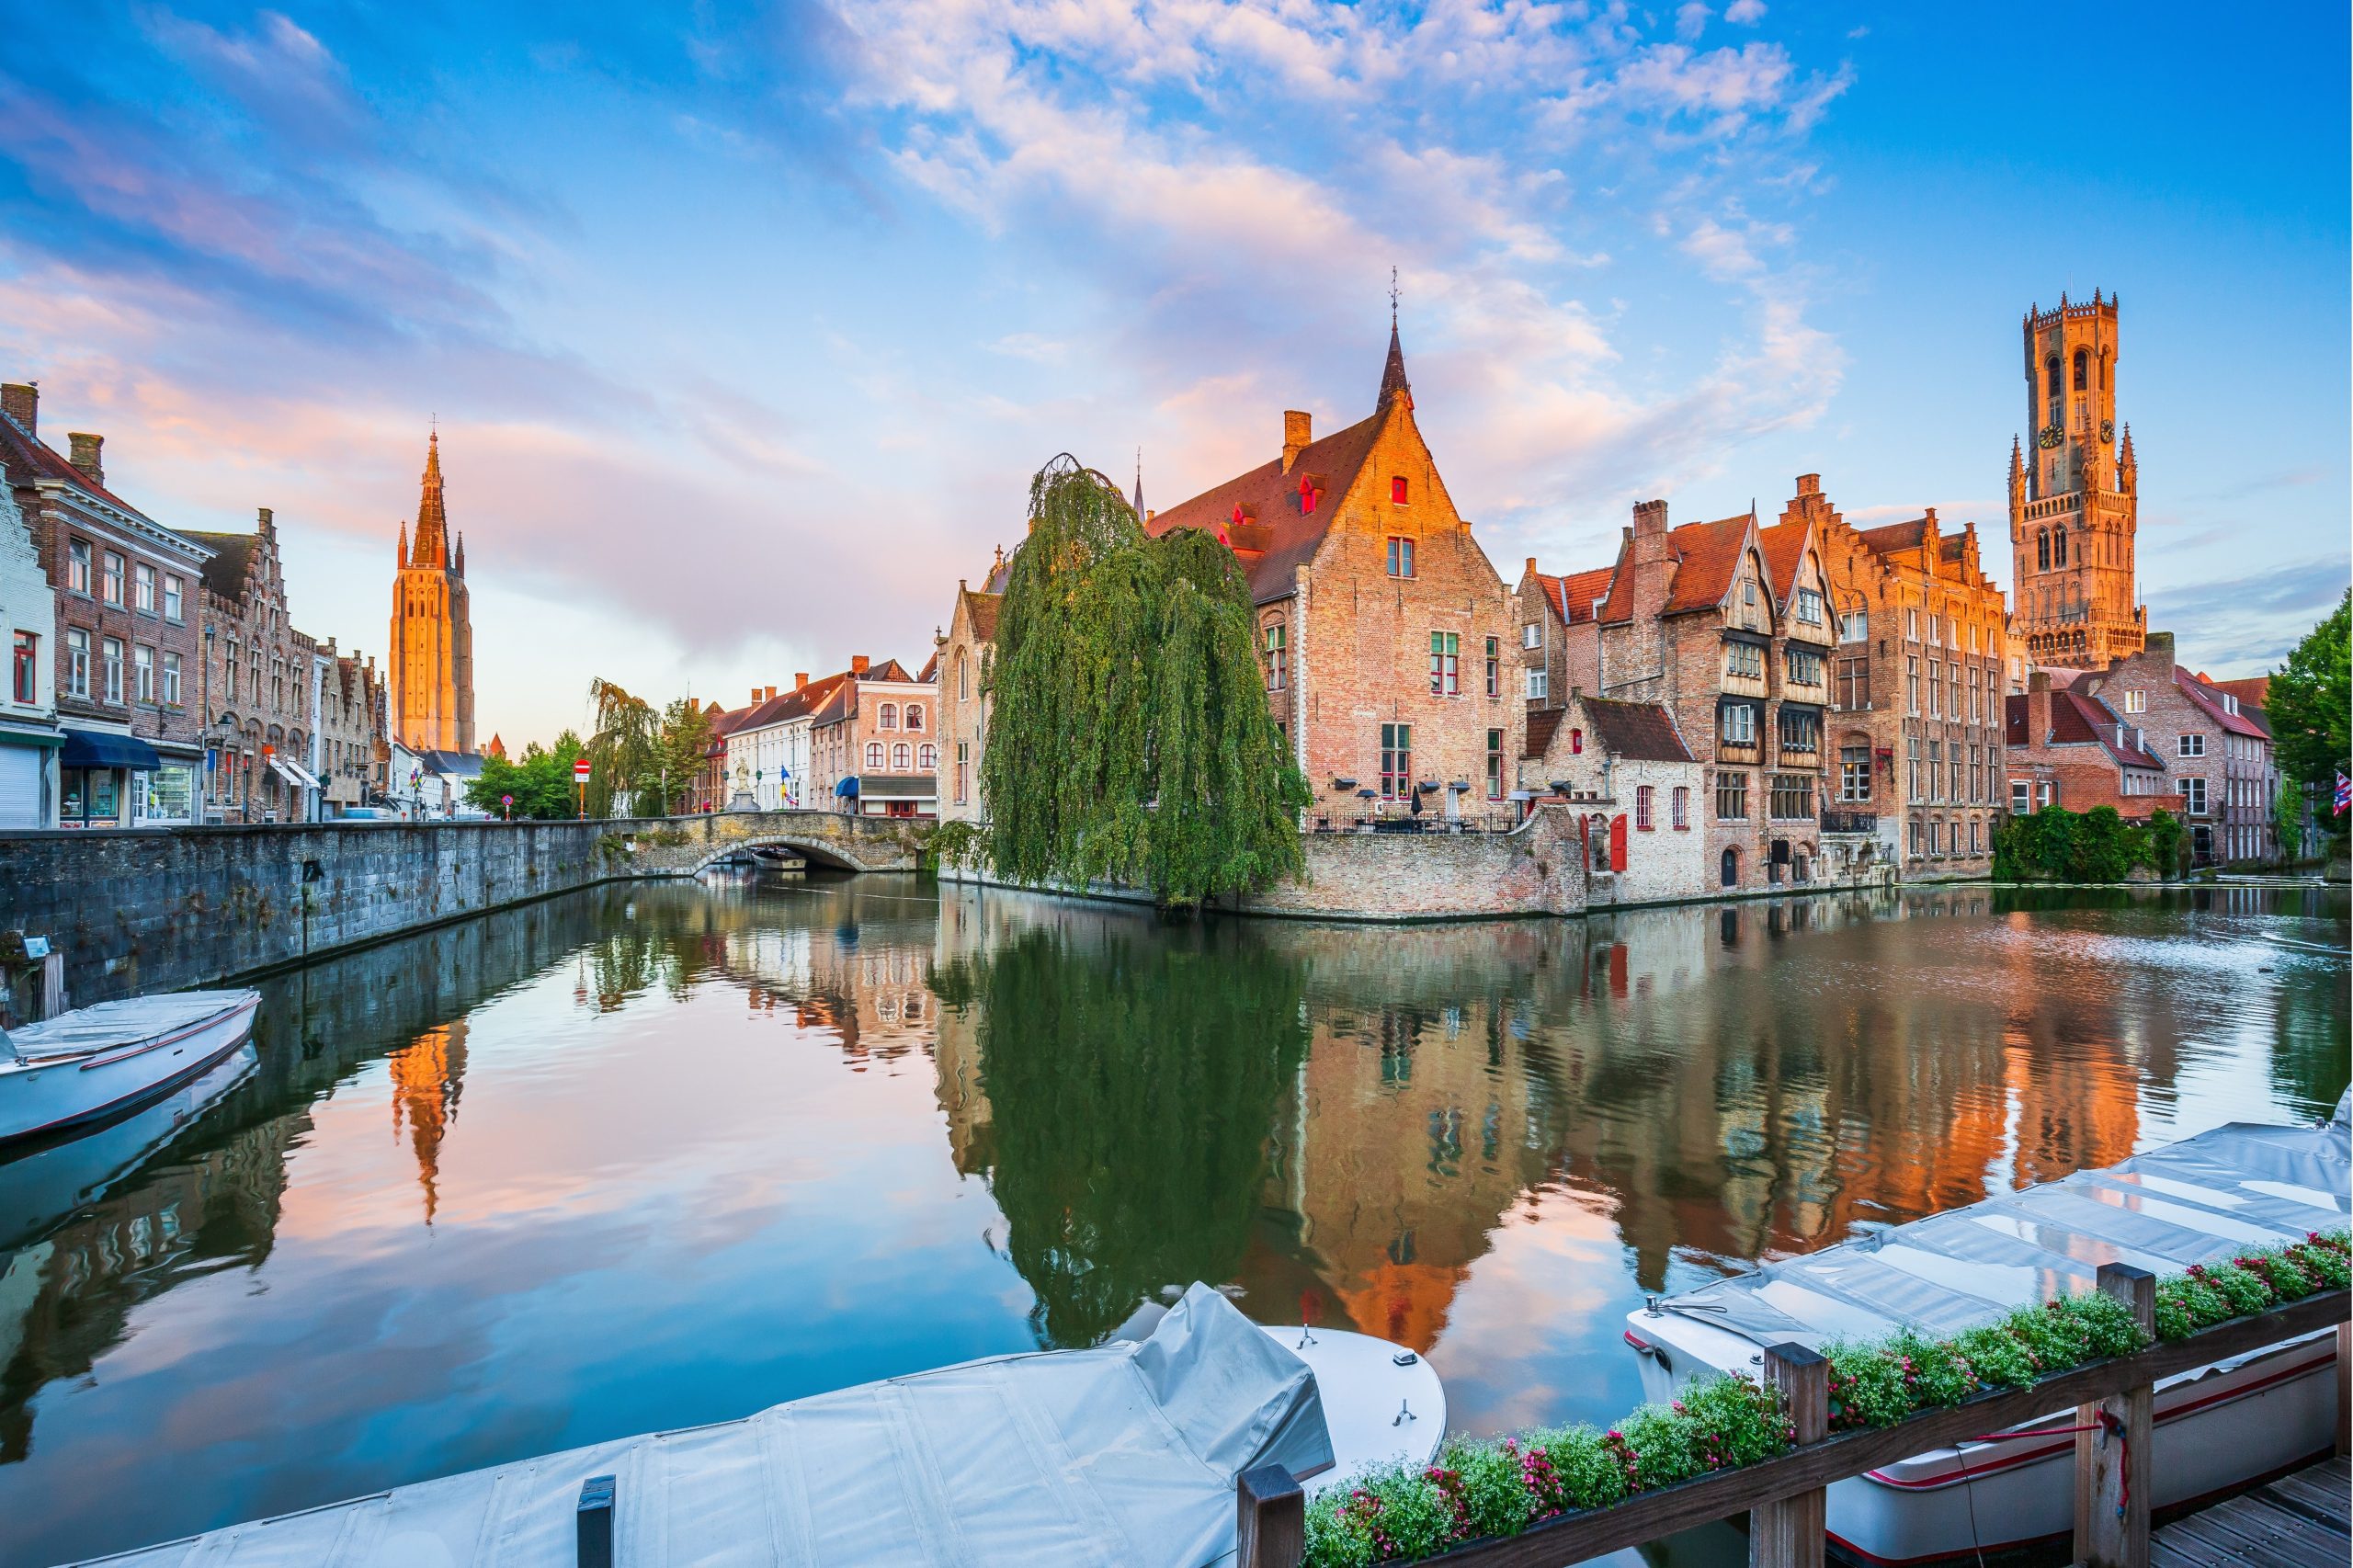 The second activity in the 10 best things to do in Belgium is to visit Bruges